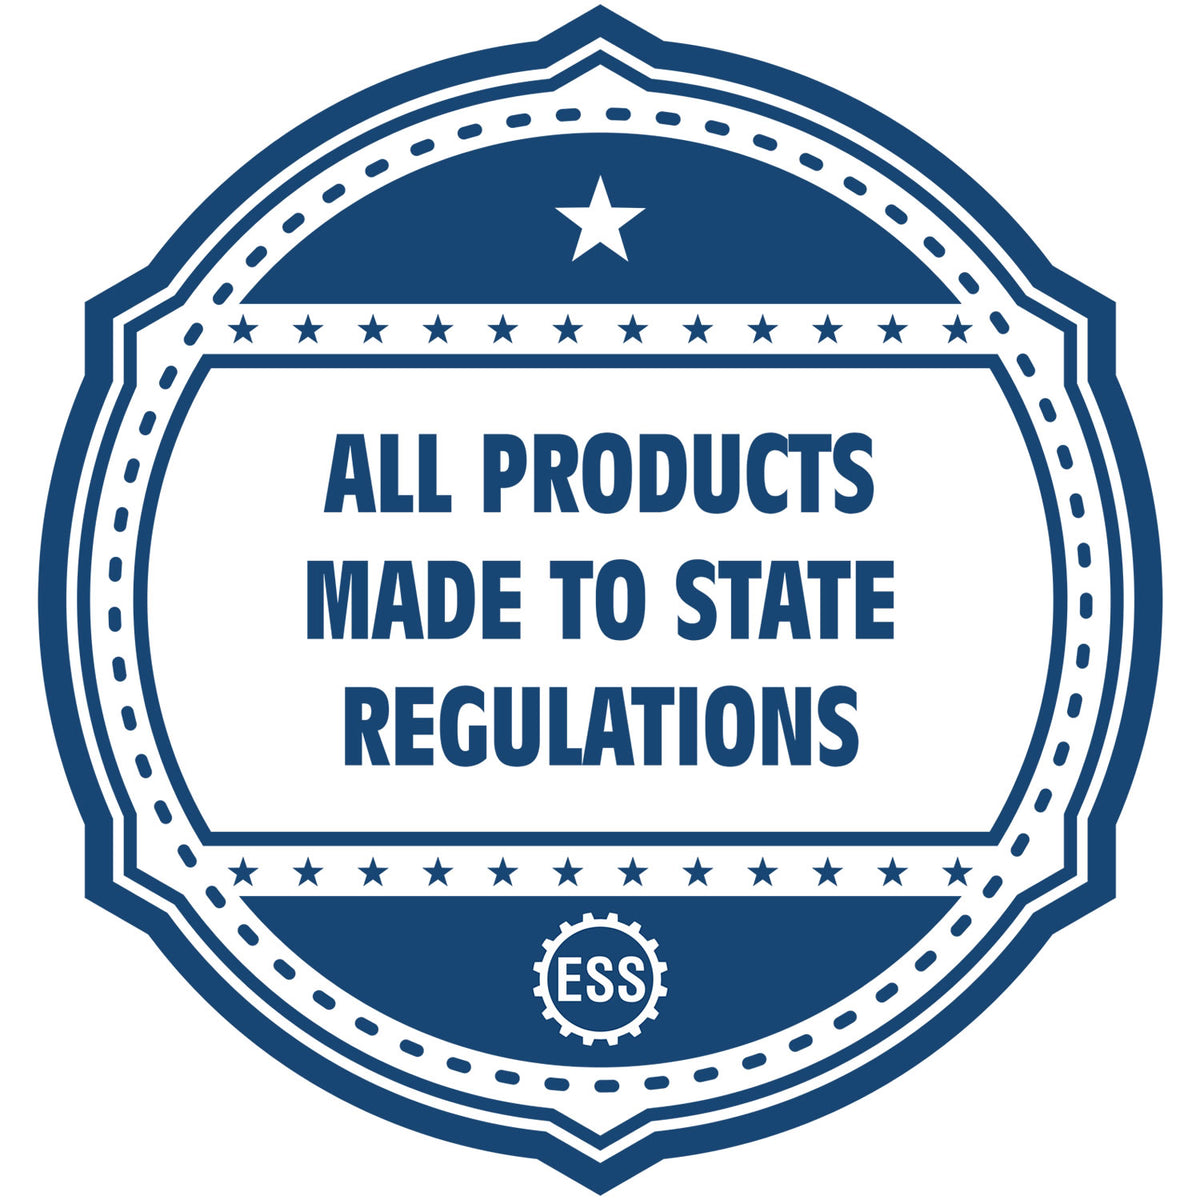 An icon or badge element for the Digital West Virginia PE Stamp and Electronic Seal for West Virginia Engineer showing that this product is made in compliance with state regulations.